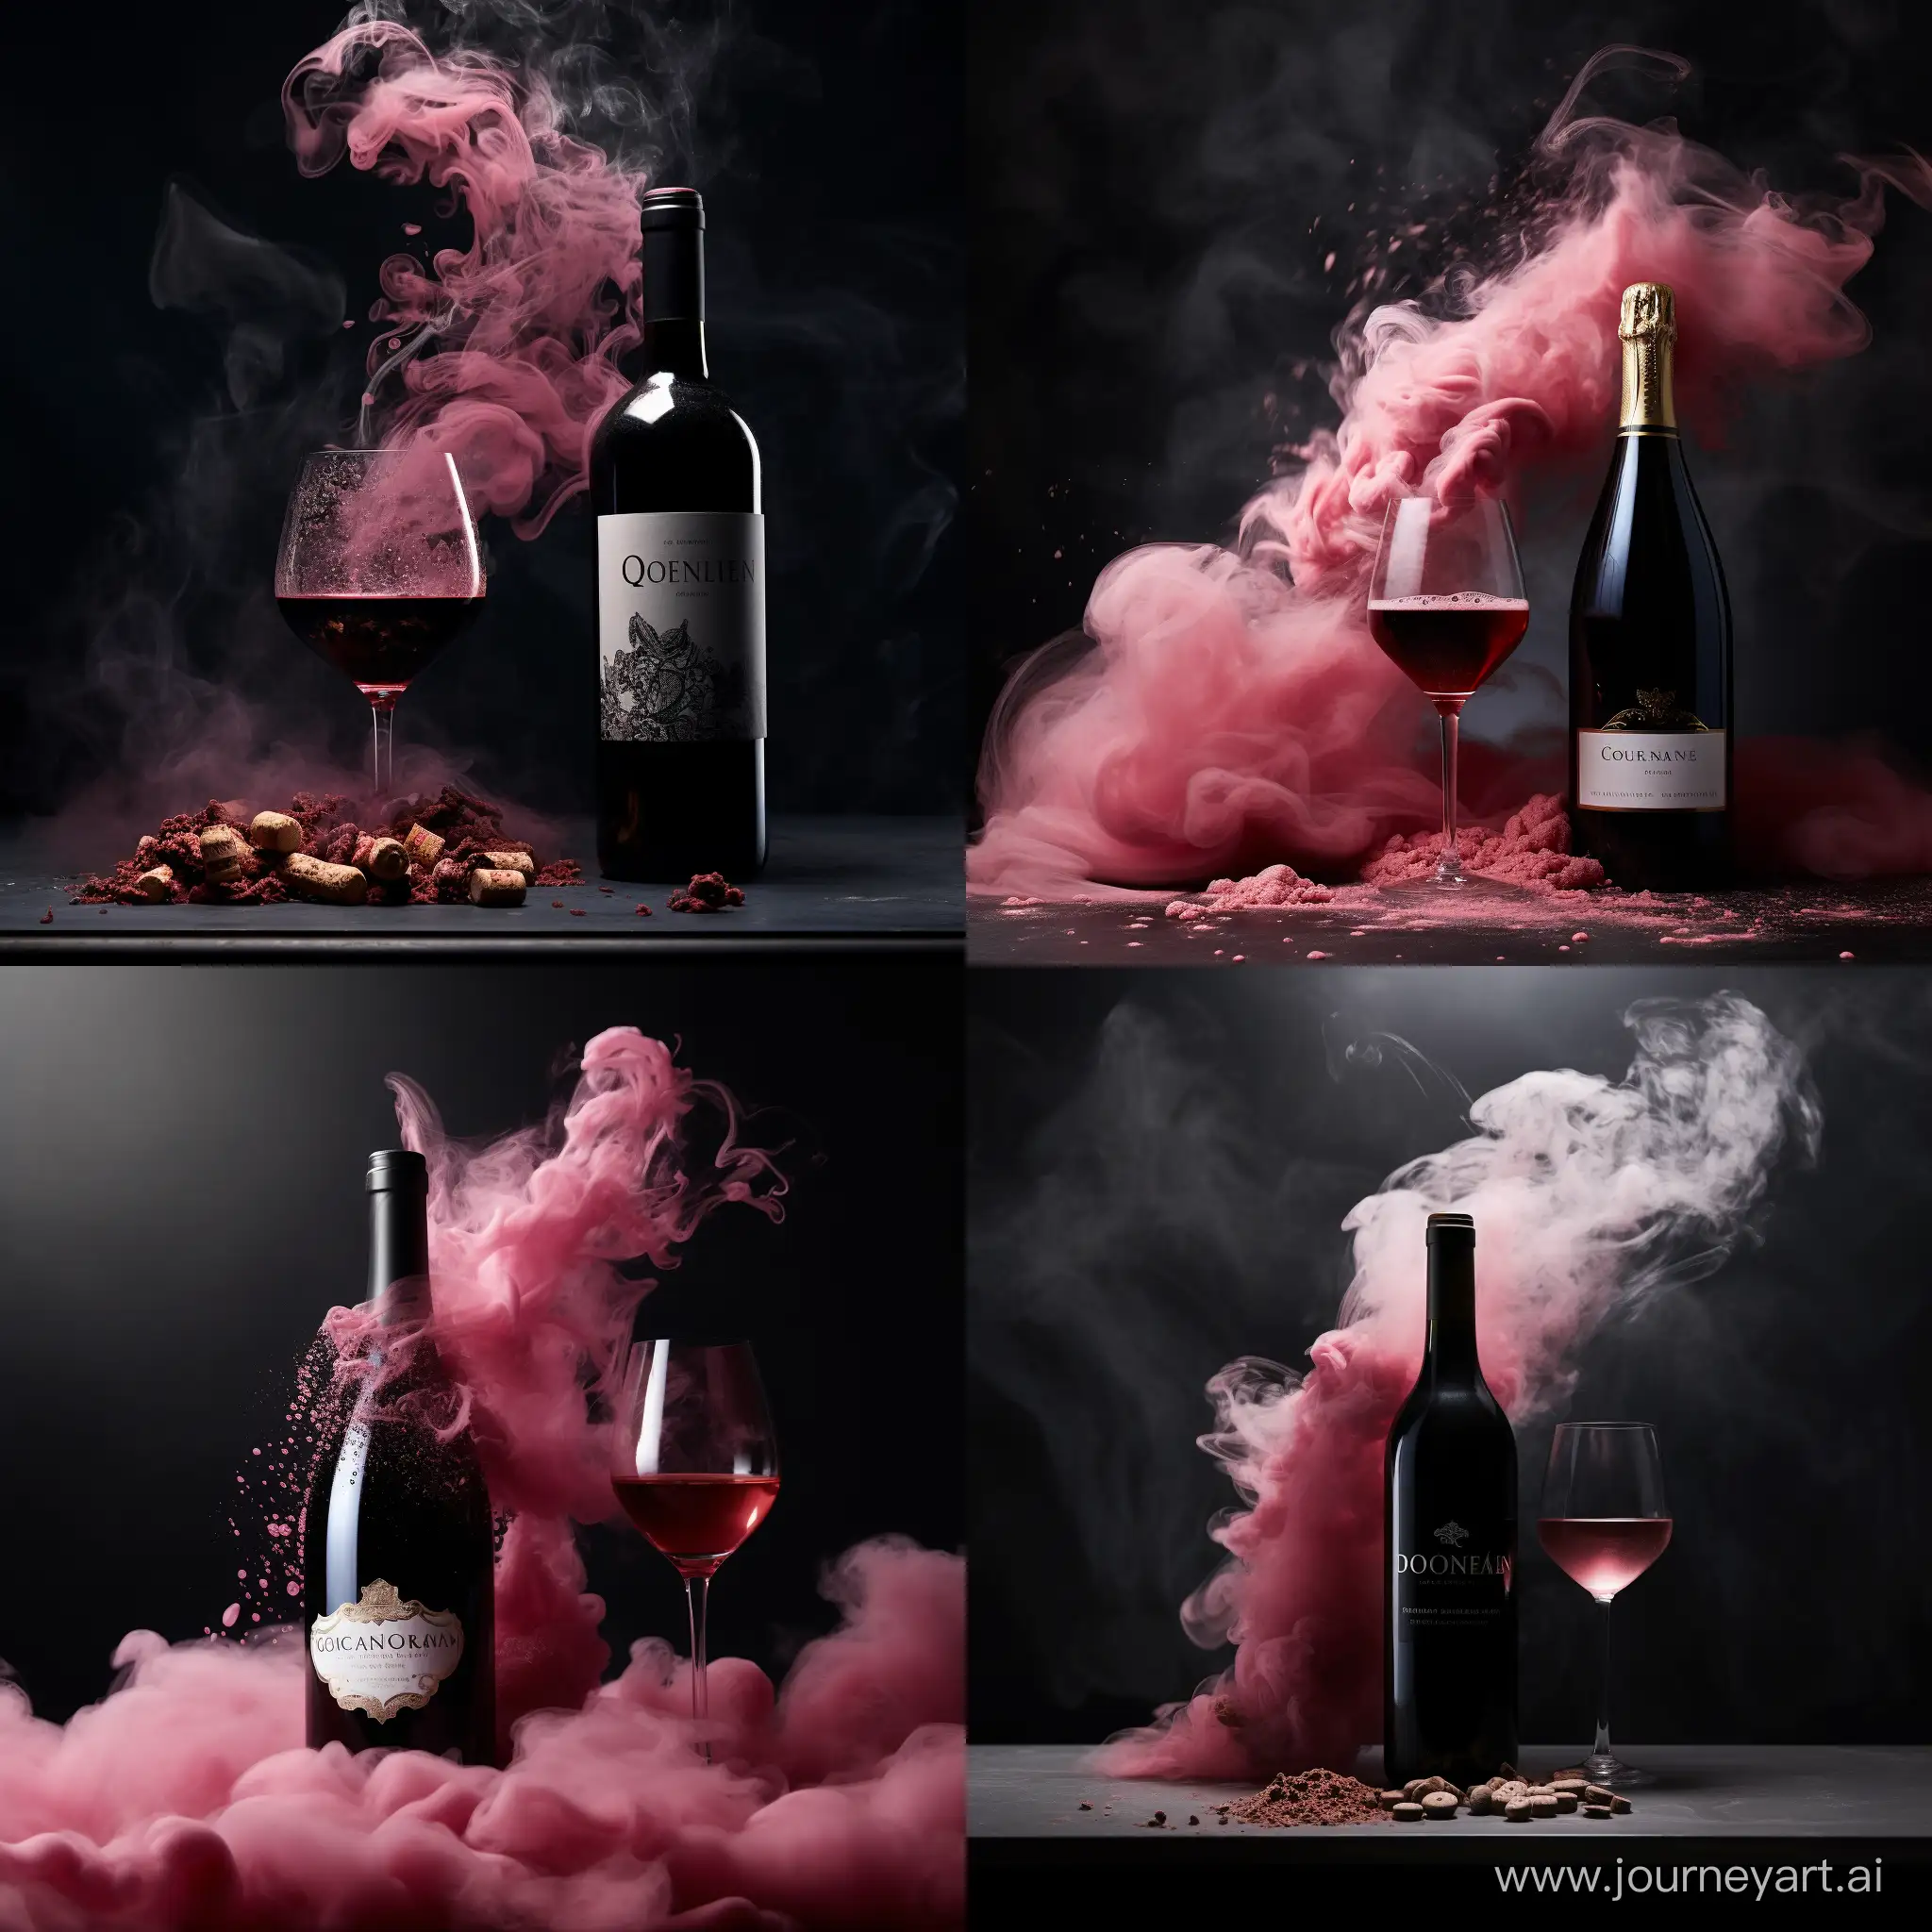 Prompt 
smoke from a bottel of wine artistically forms the name with a pink smoke "Queen"